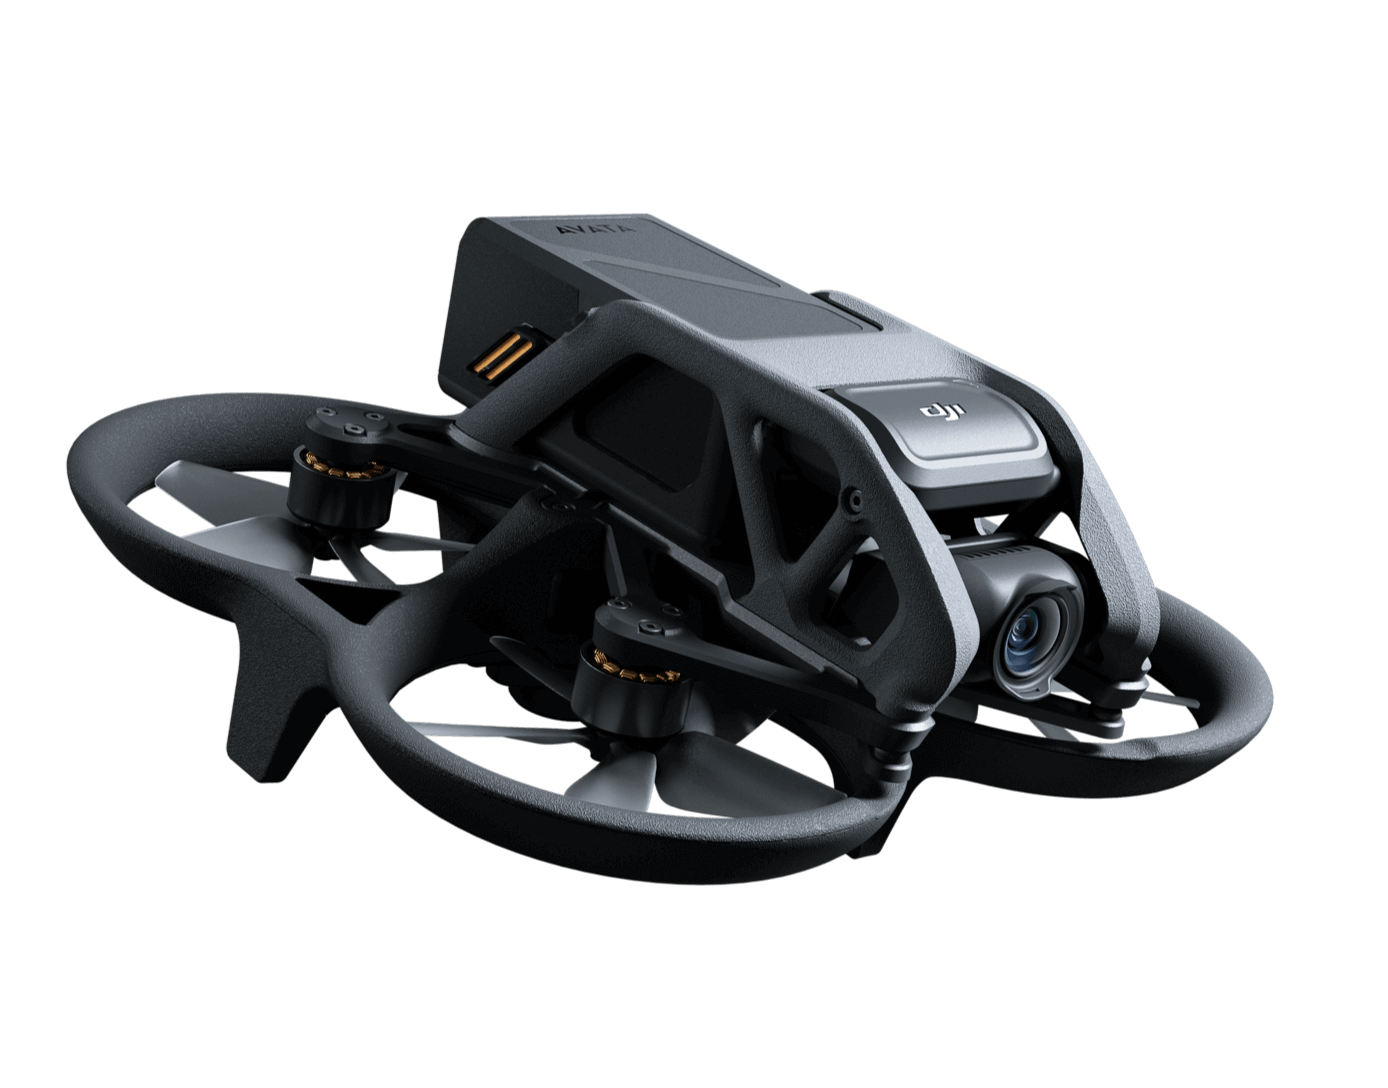 DJI Avata supports other controllers and goggles .